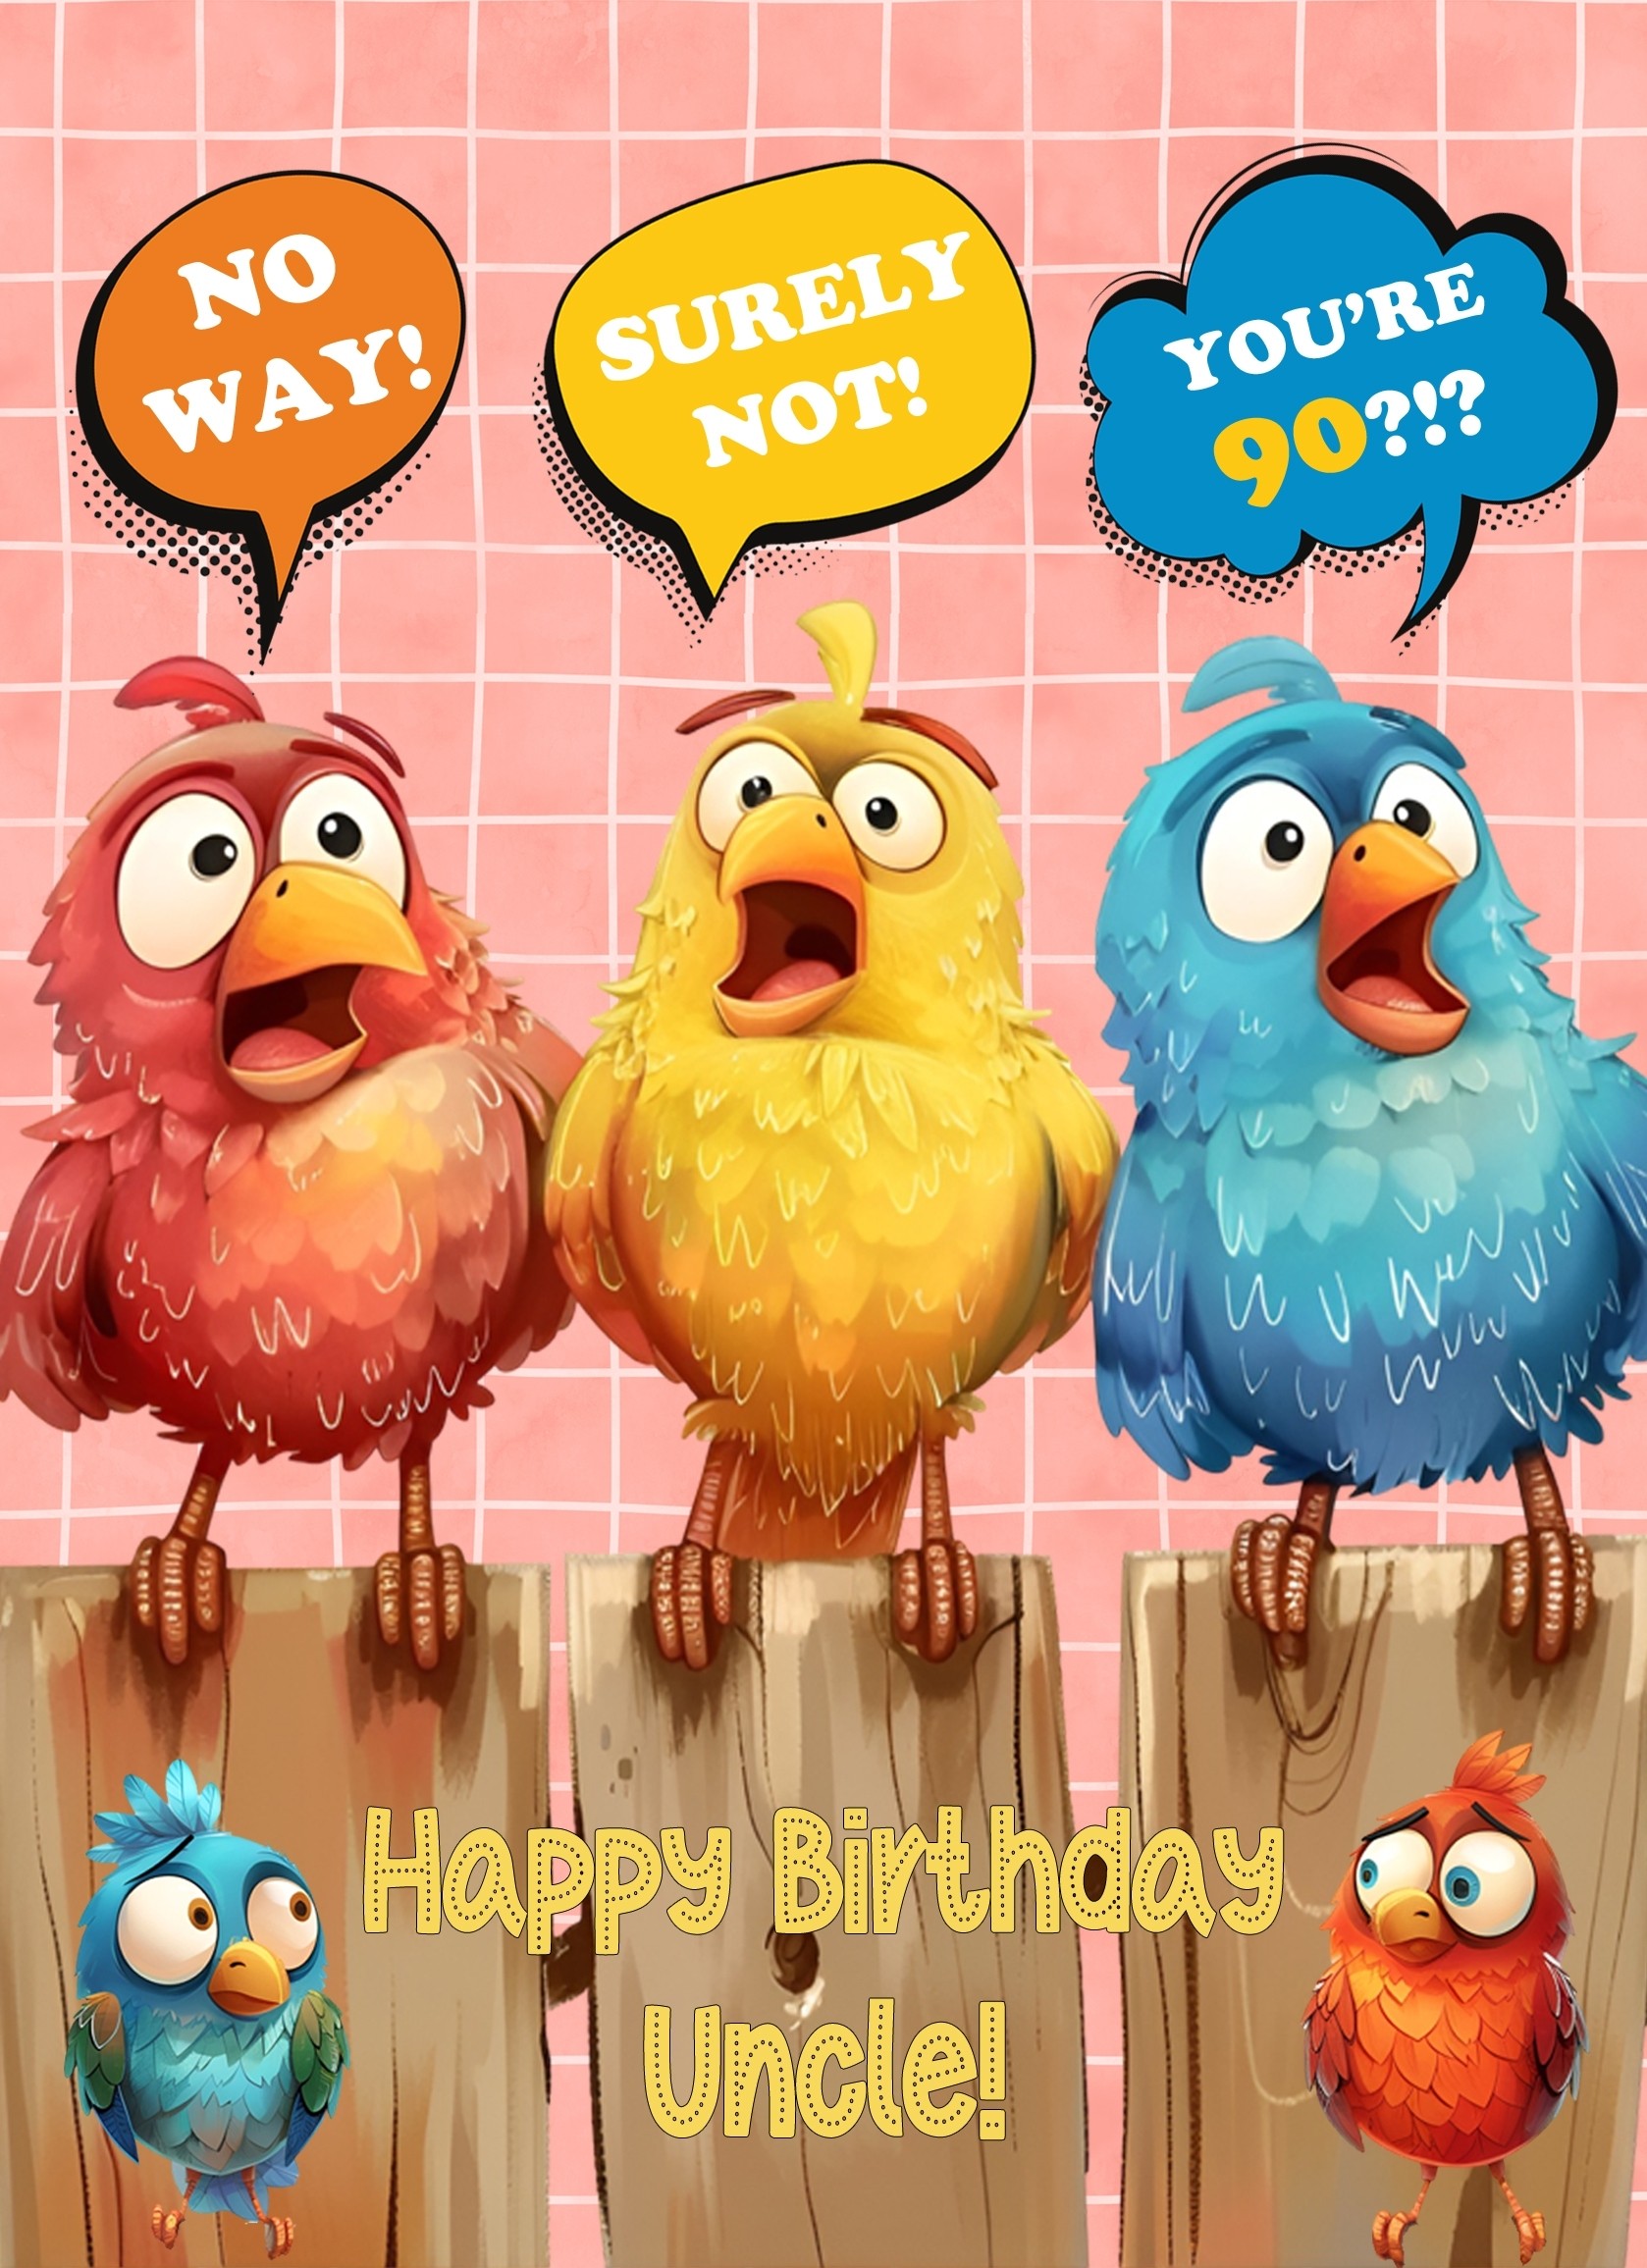 Uncle 90th Birthday Card (Funny Birds Surprised)